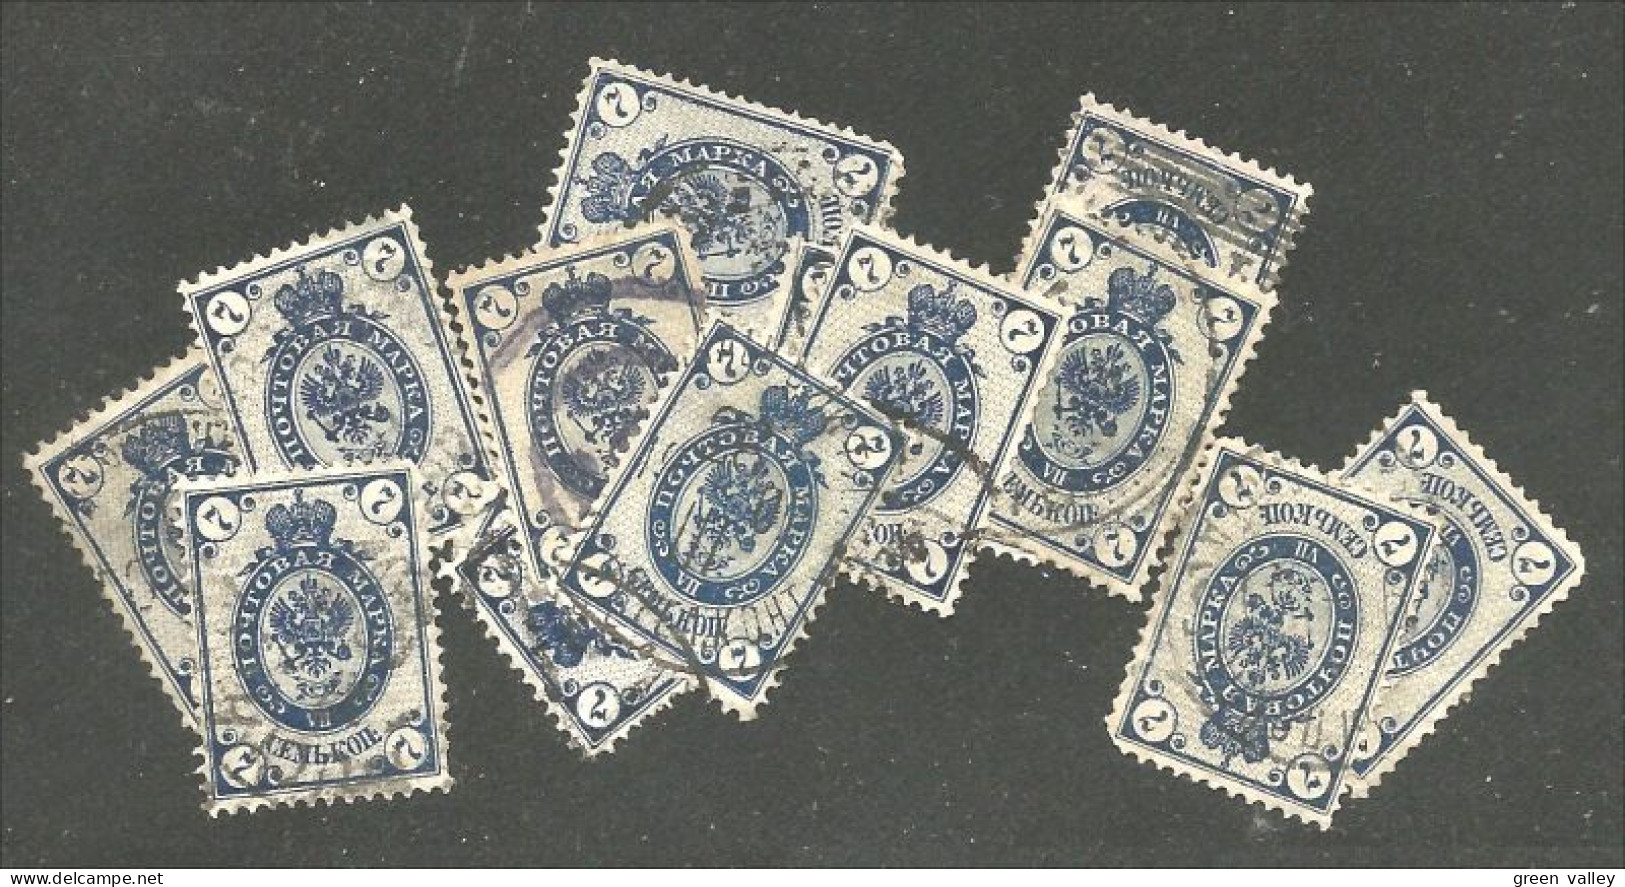 771 Russie 7k 1889 Blue 35+ Stamps For Study Aigle Imperial Eagle Post Horn Cor Postal (RUZ-341) - Gebruikt